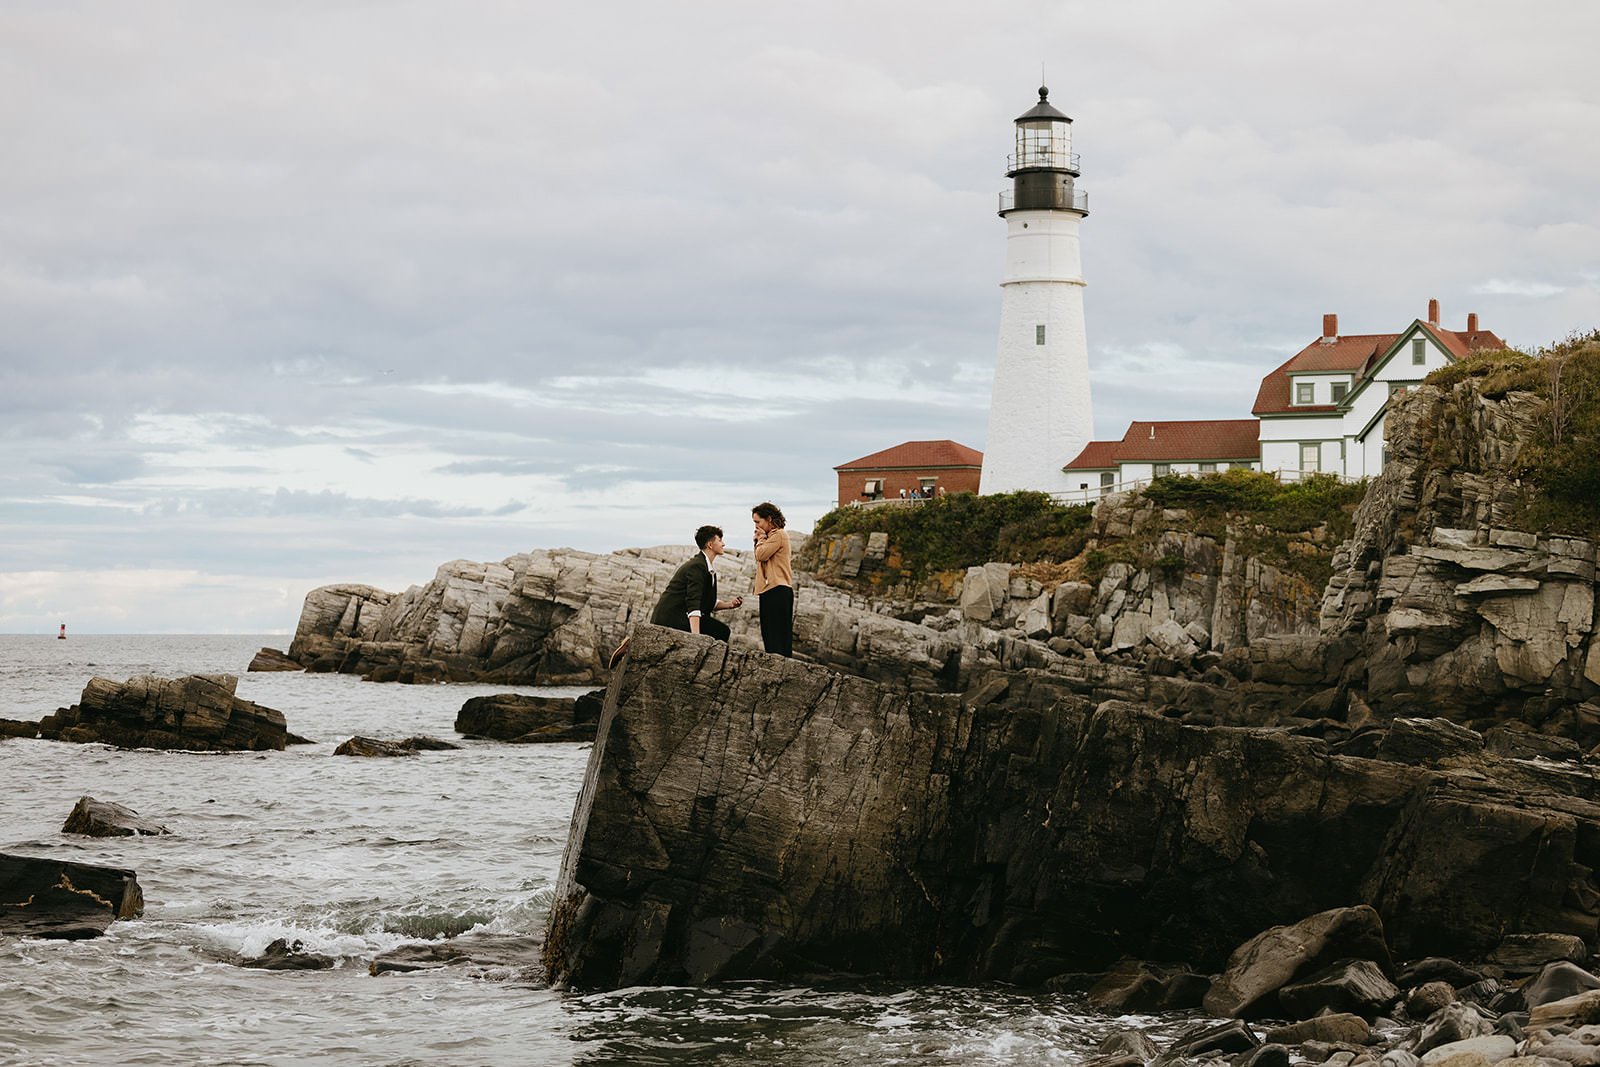 lesbian double proposal at the portland head lighthouse in portland maine